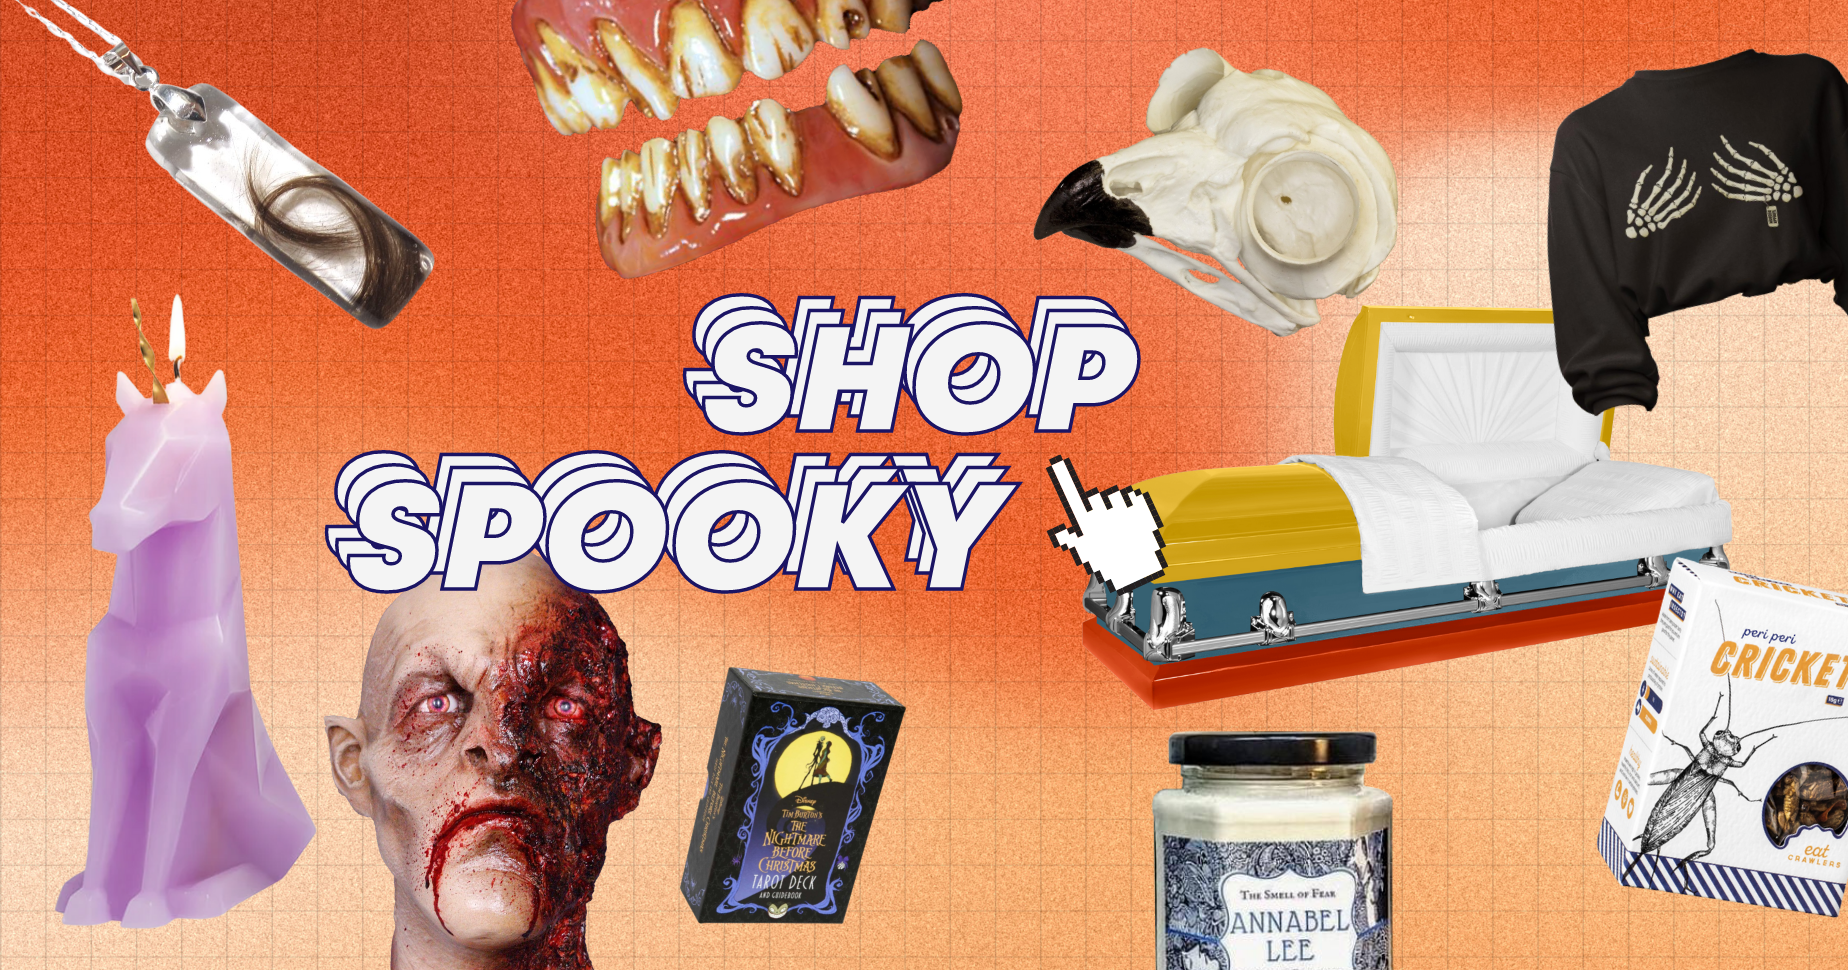 Header image featuring different Halloween themed products with "Shop Spooky" text in the centre